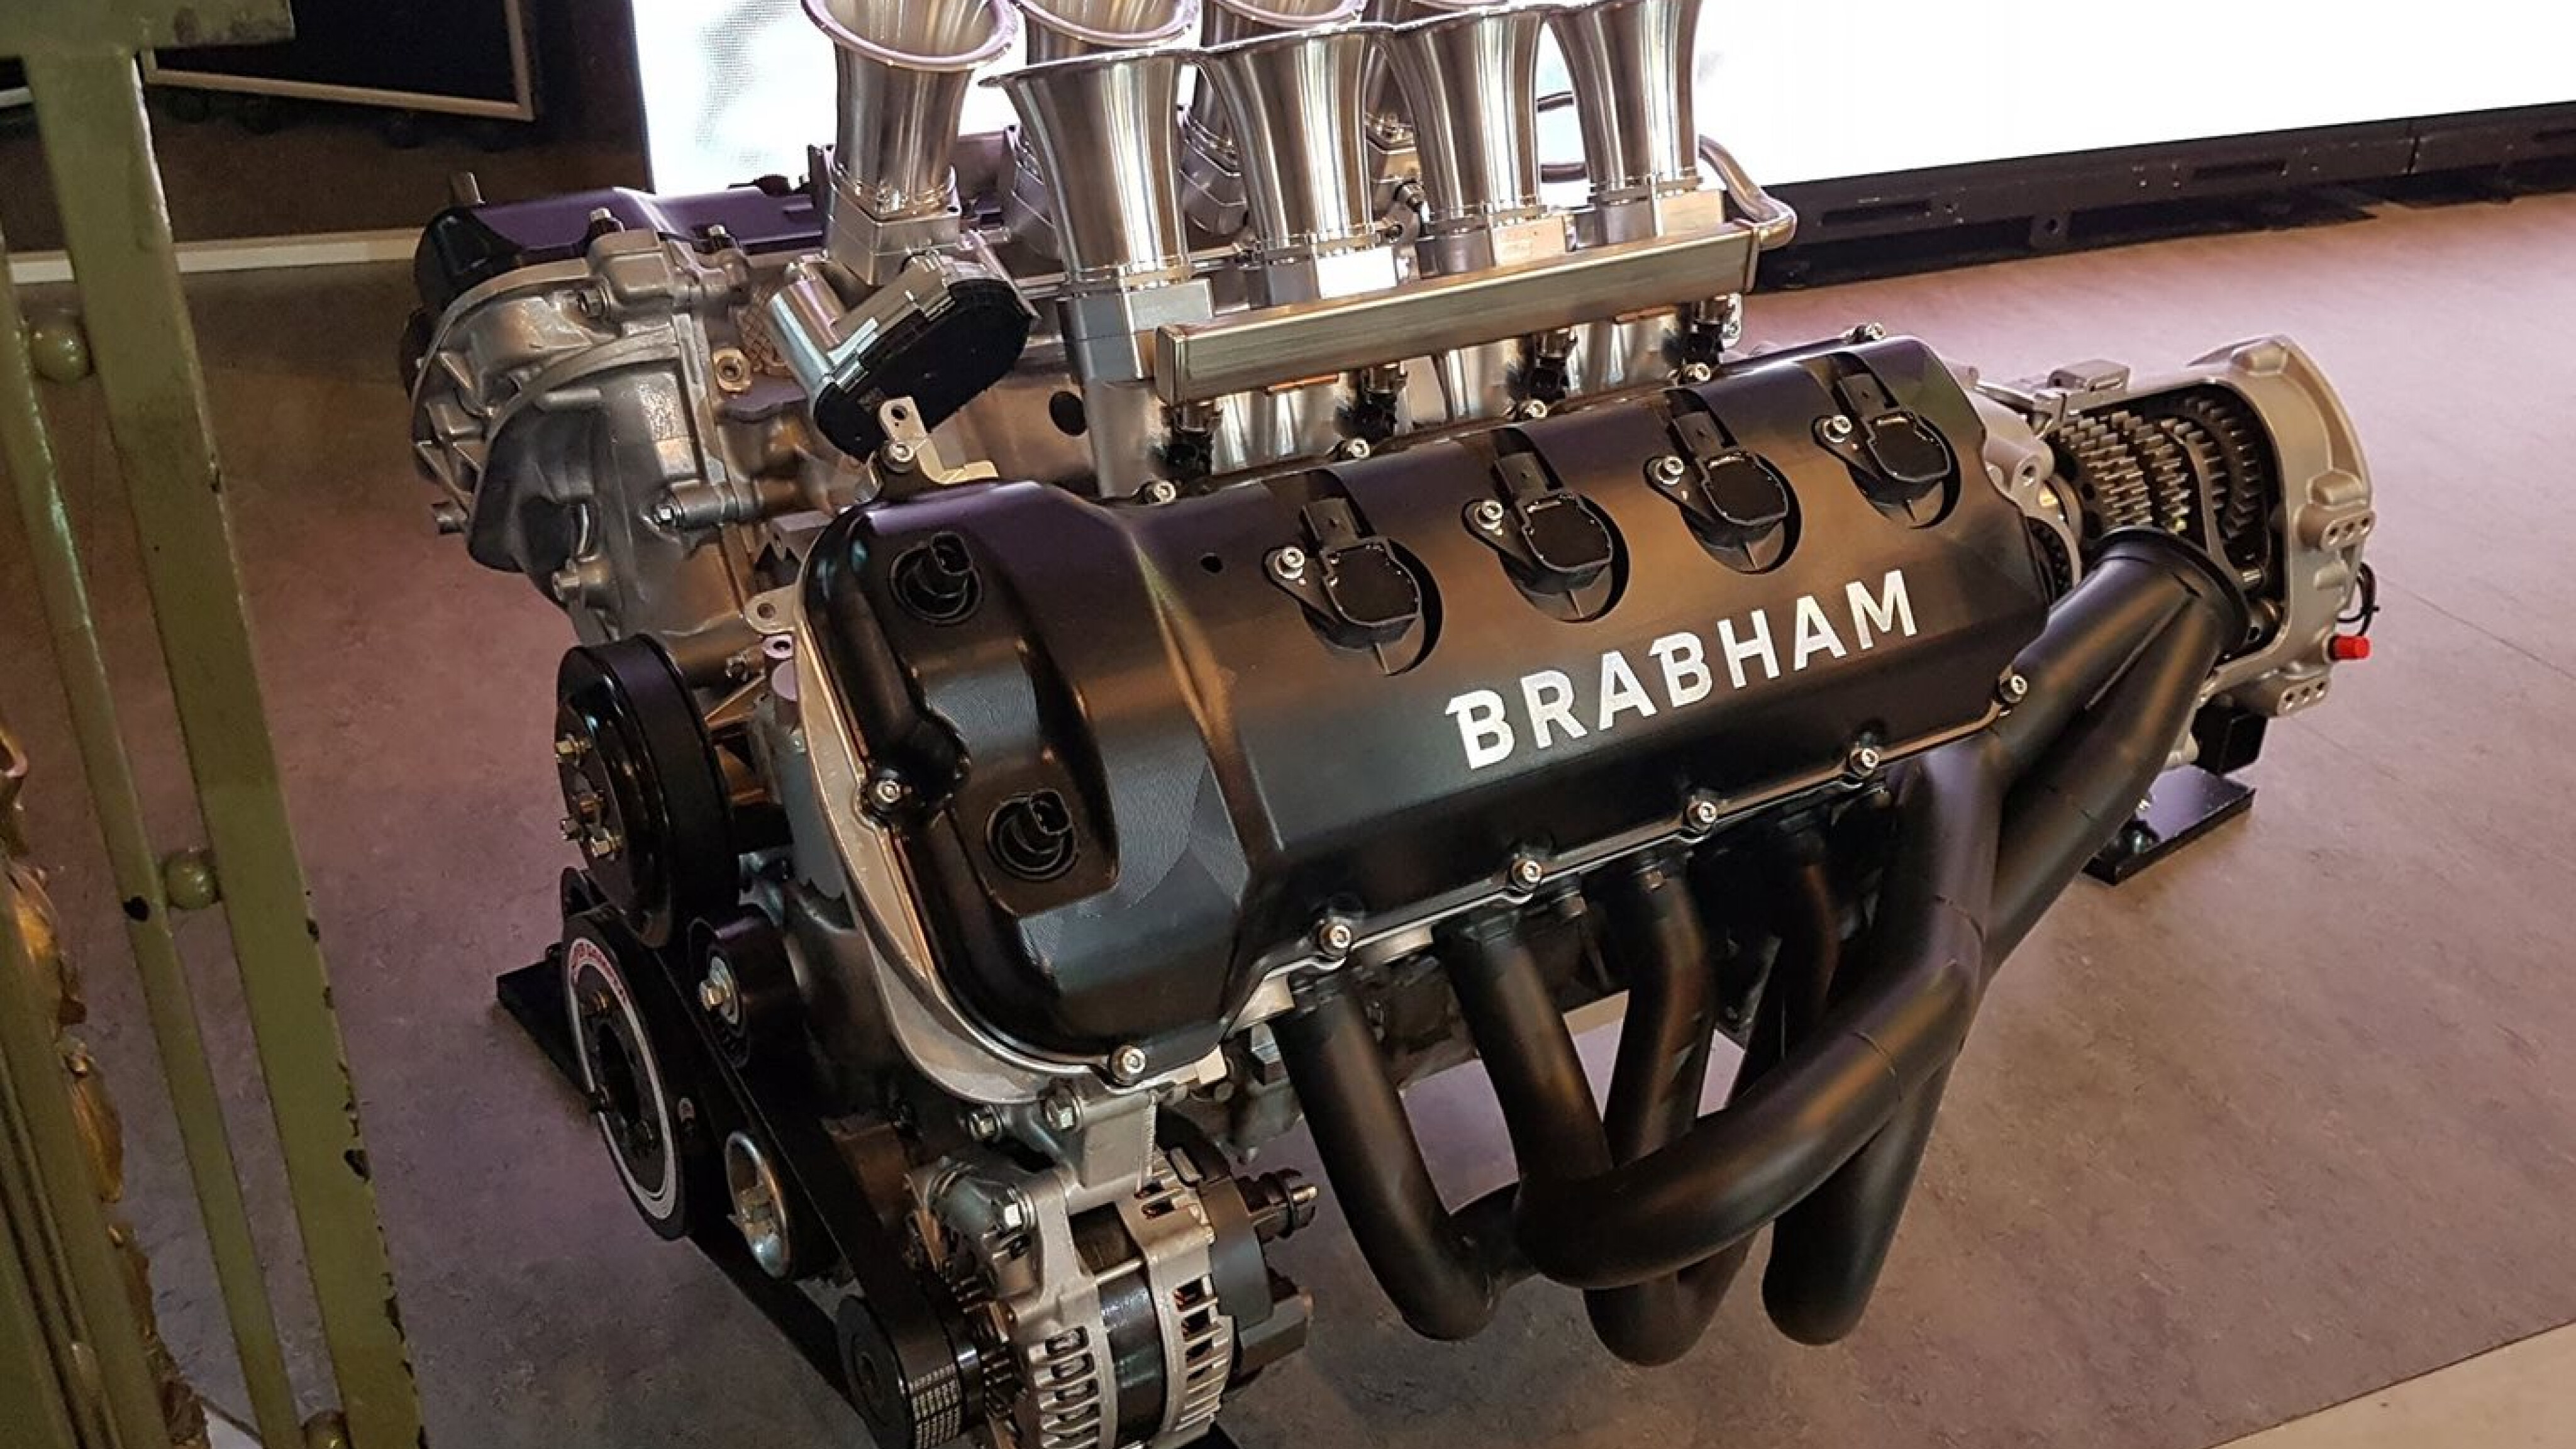 Brabham BT62: What we know about its V8 engine